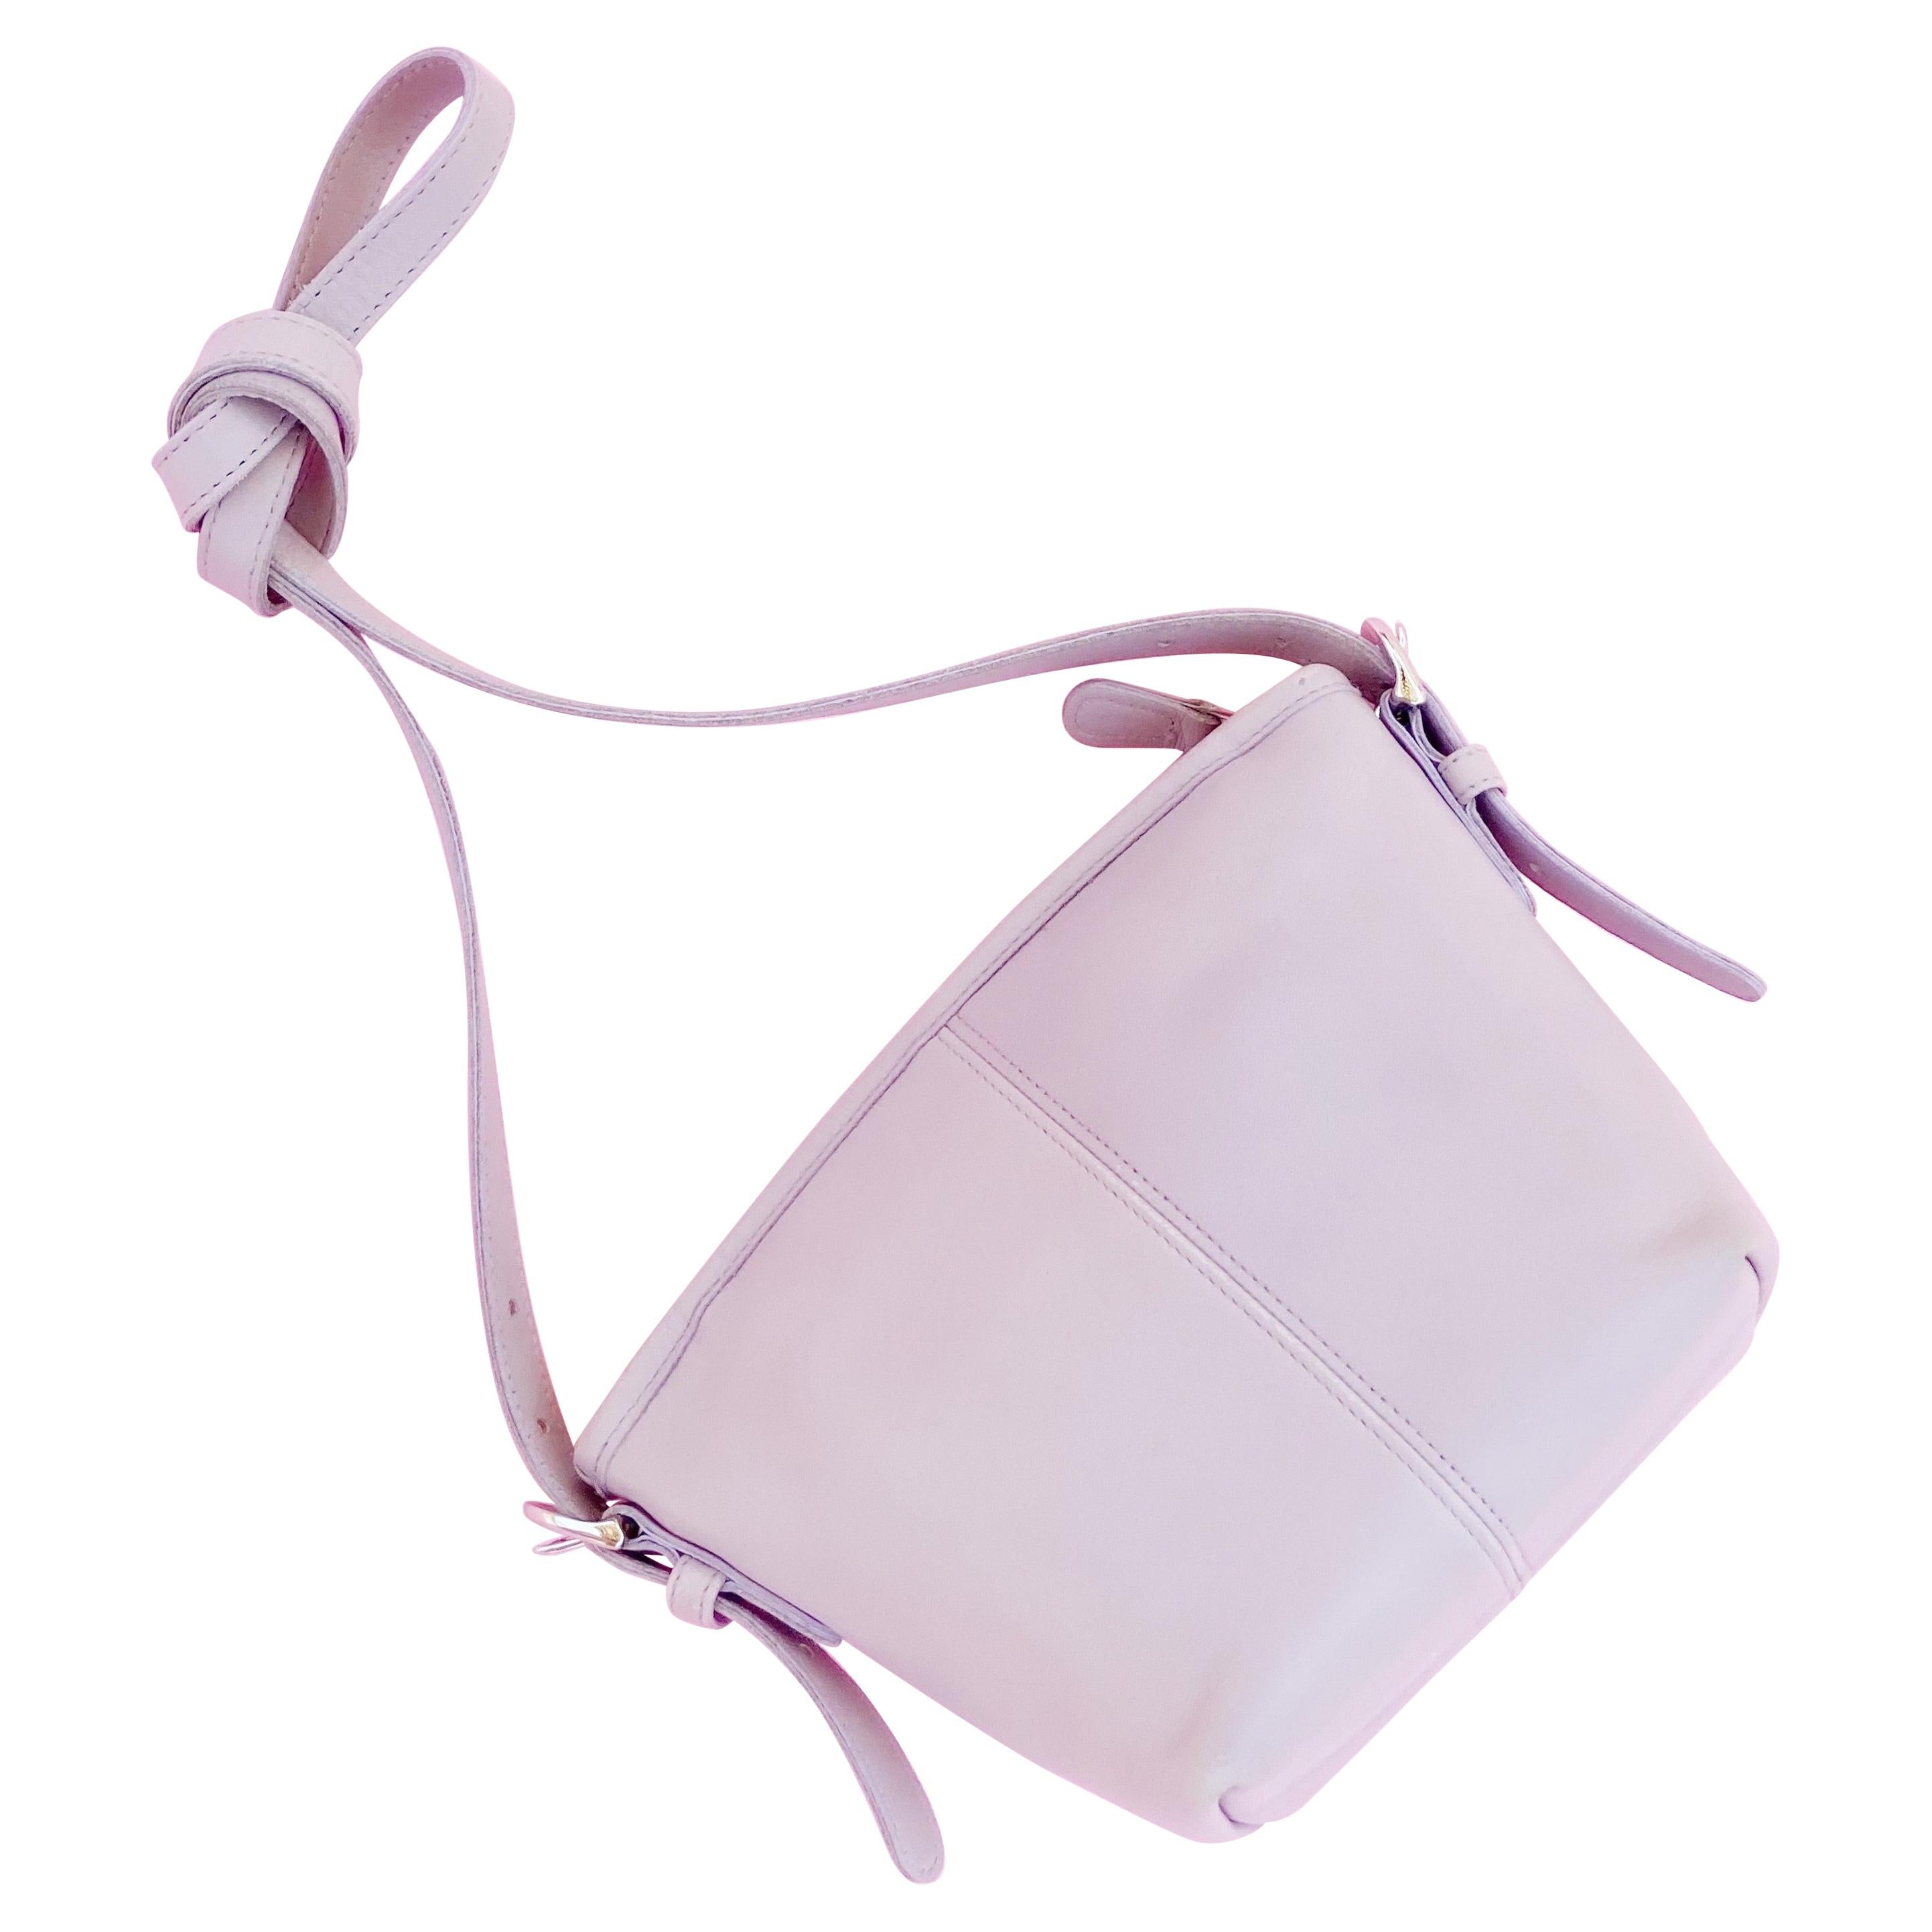 Lavender Leather Crossbody Bag By Coach, 1990s